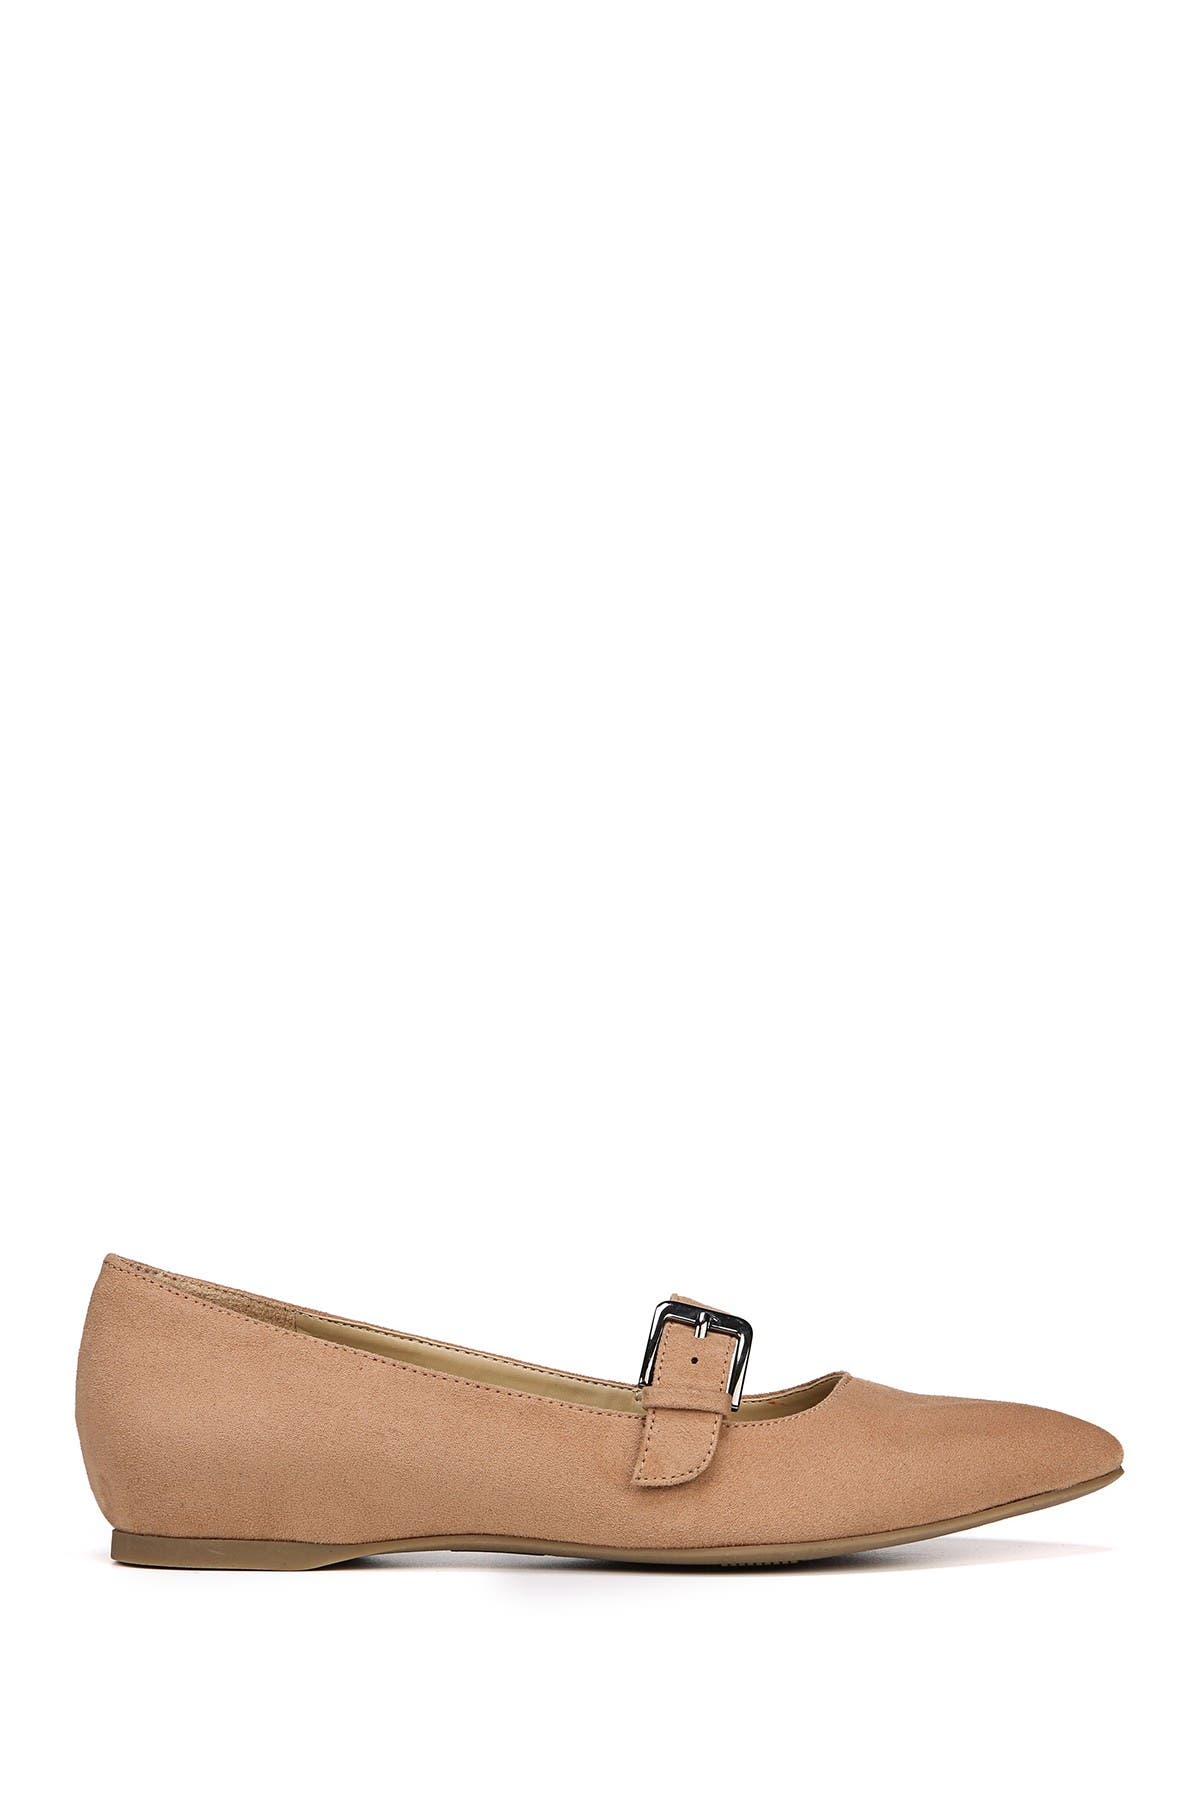 naturalizer truly flats